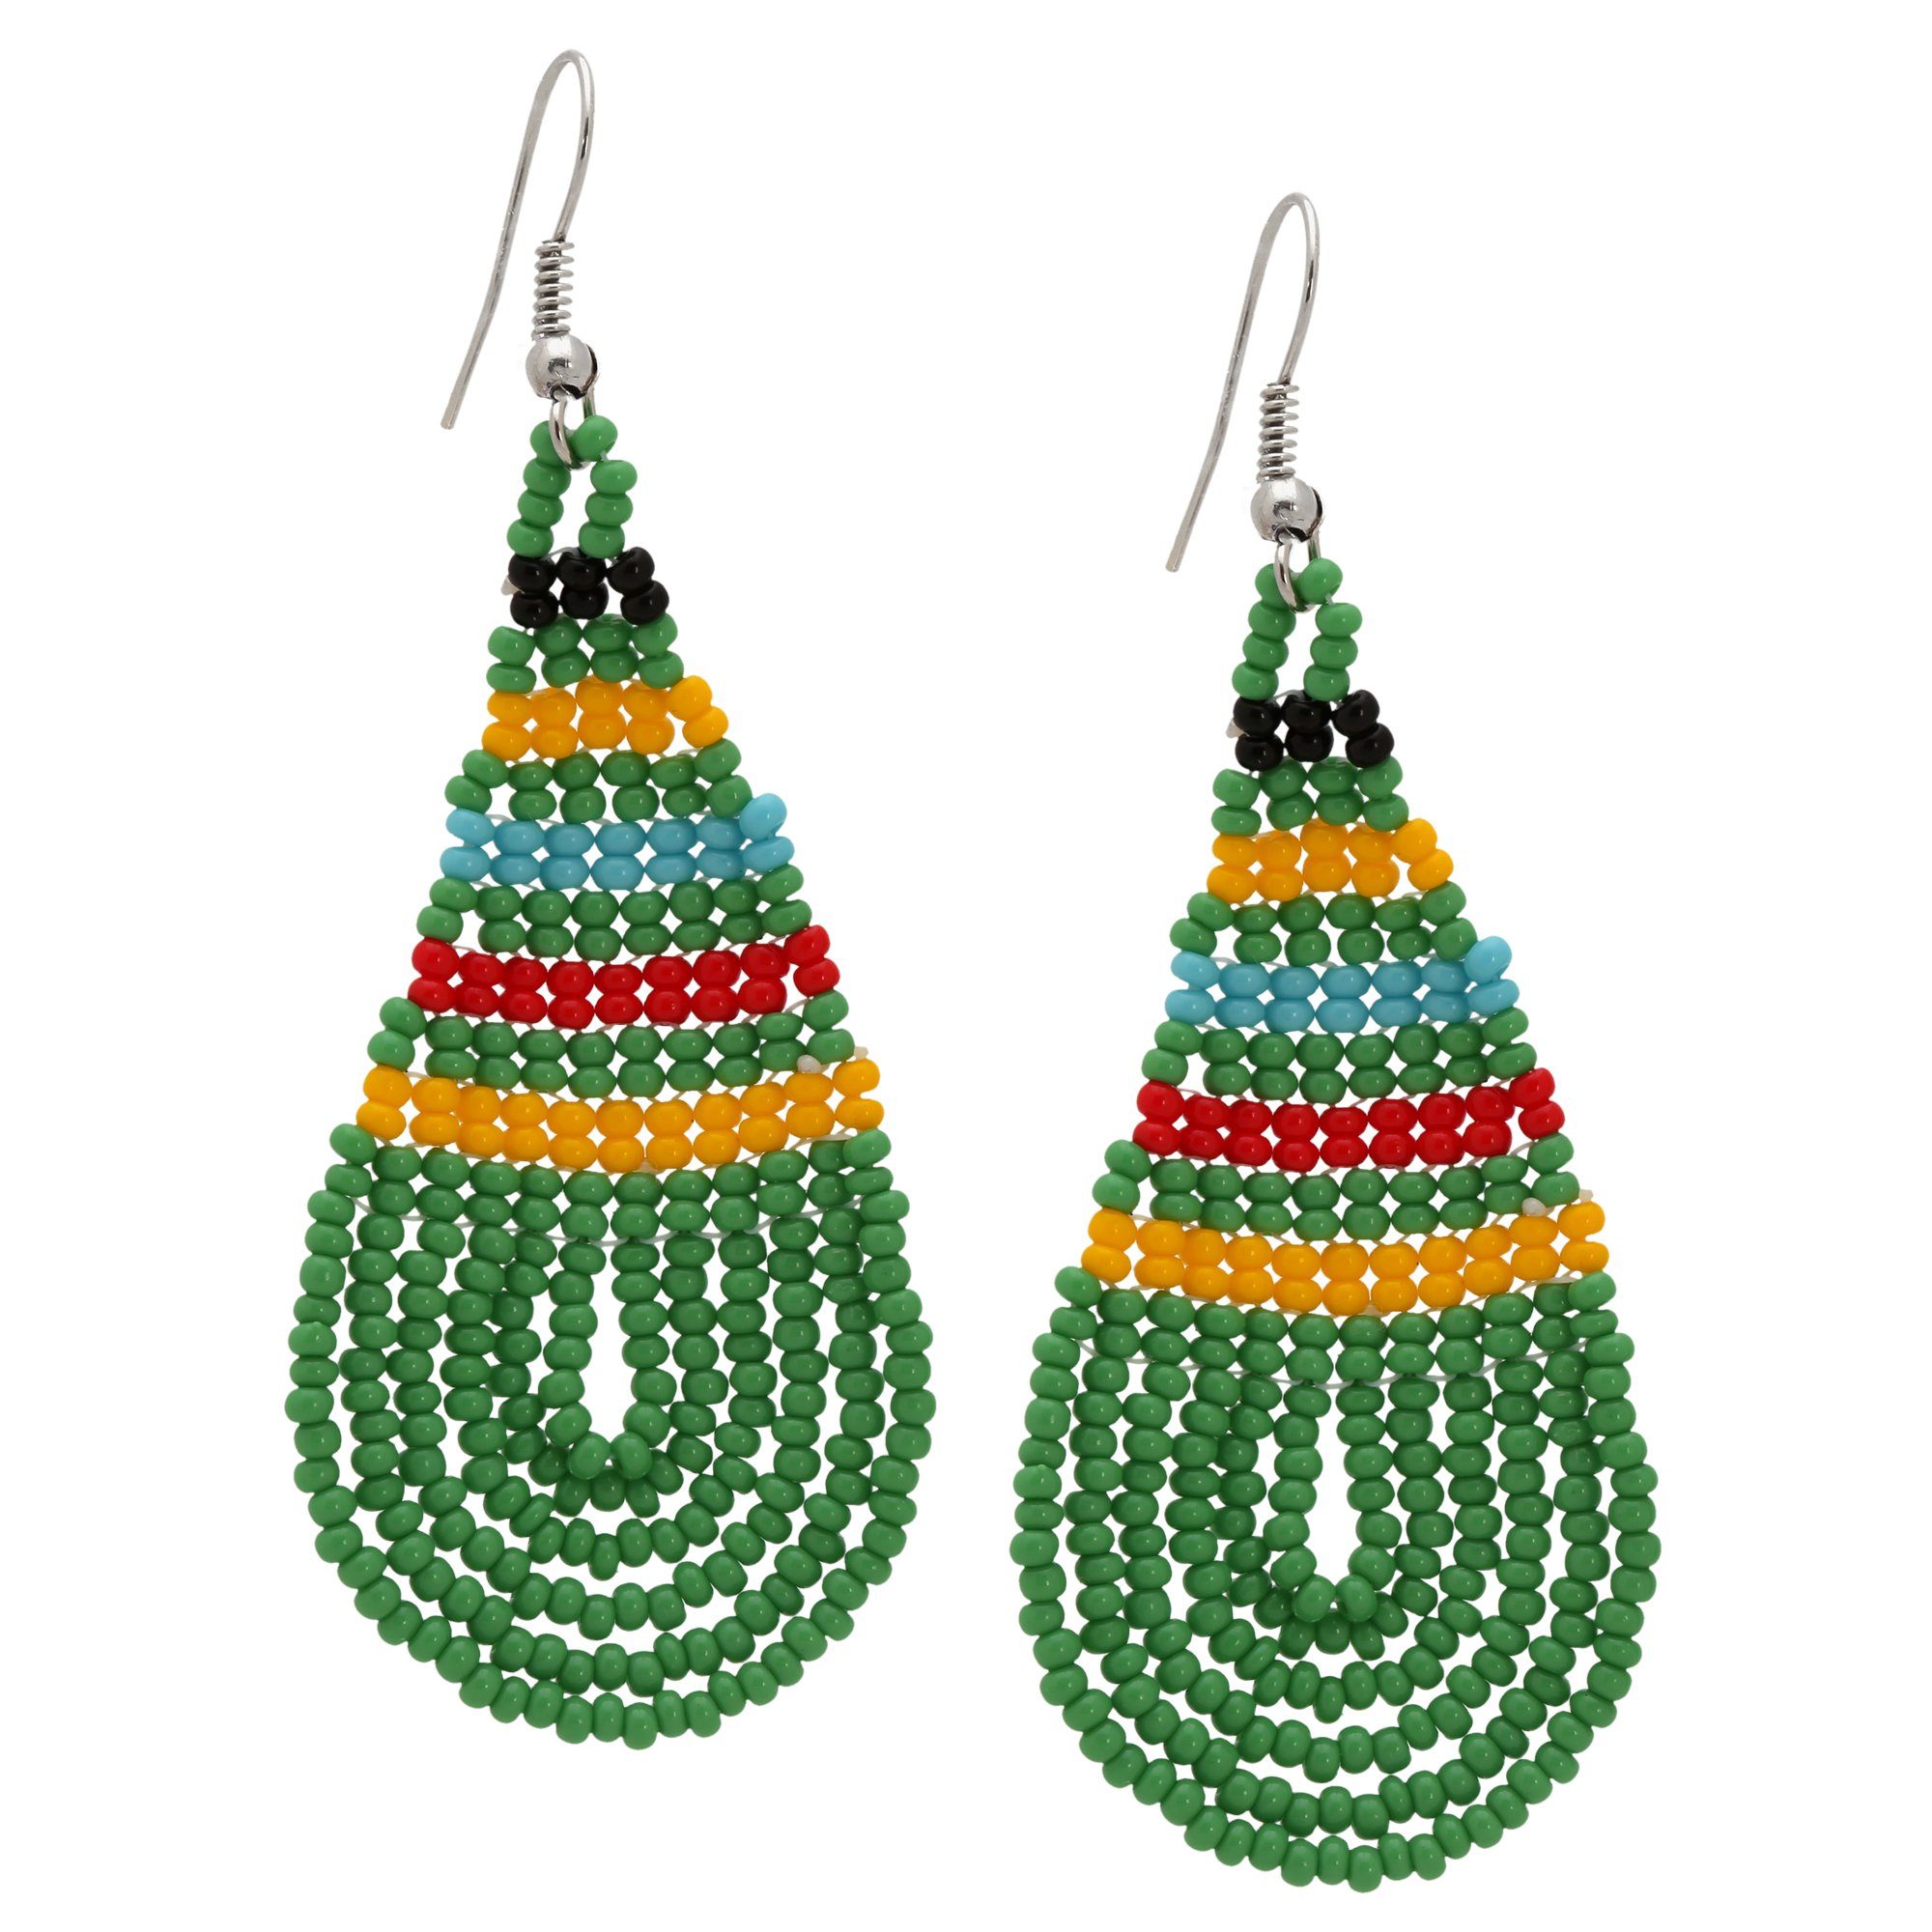 Be Bold South African Earrings - Green